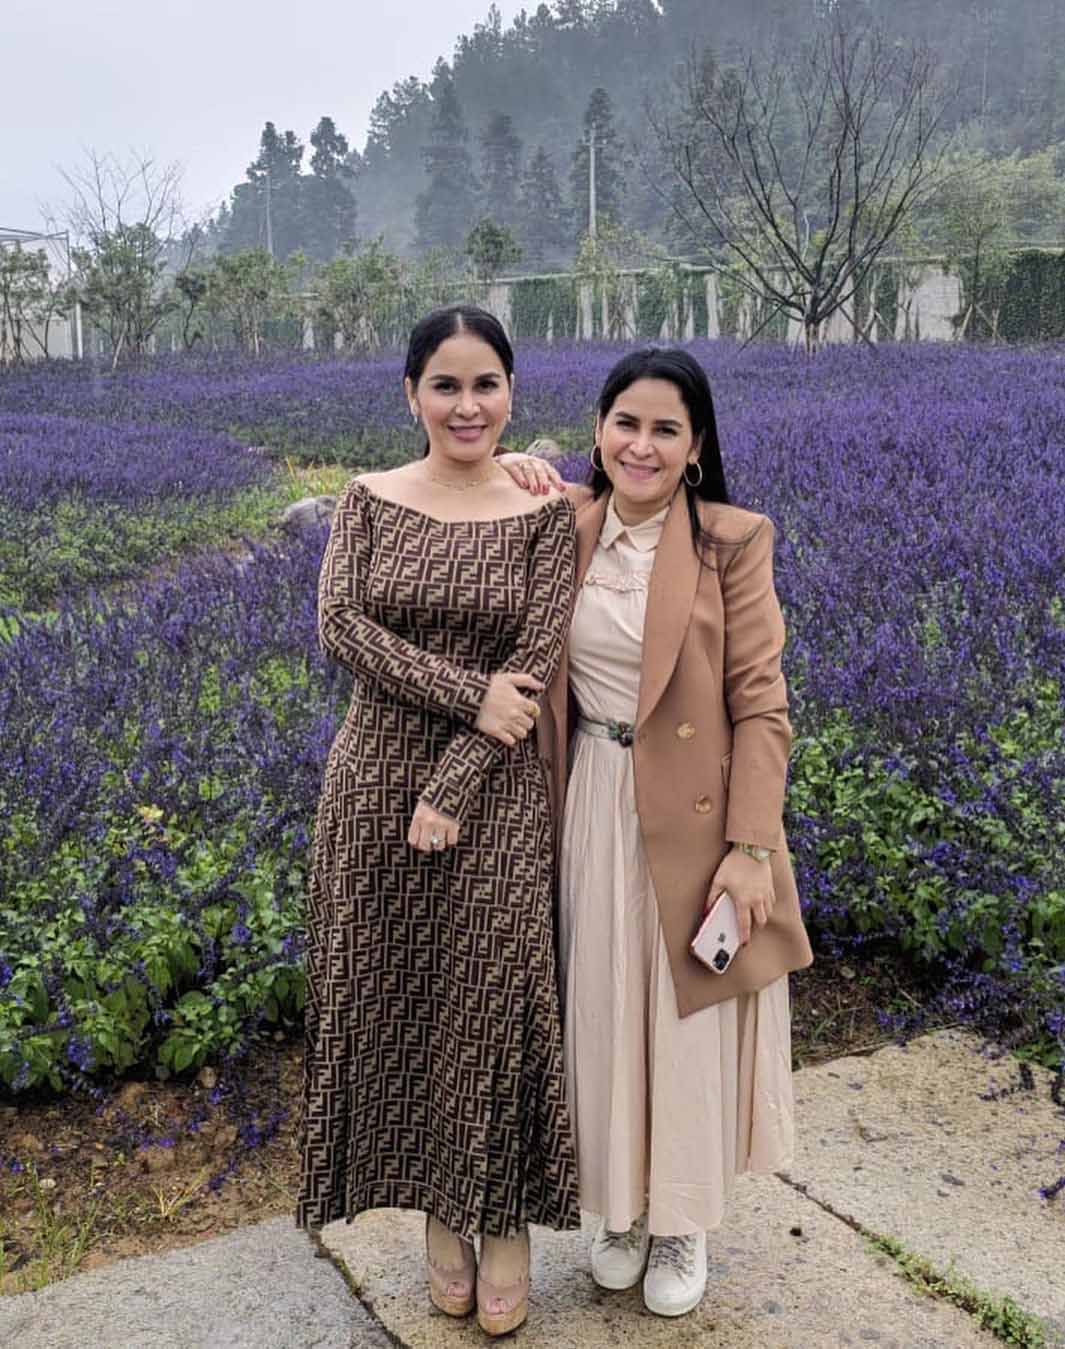 Jinkee Pacquiao and Janet Jamora's Instagram feeds are also twins